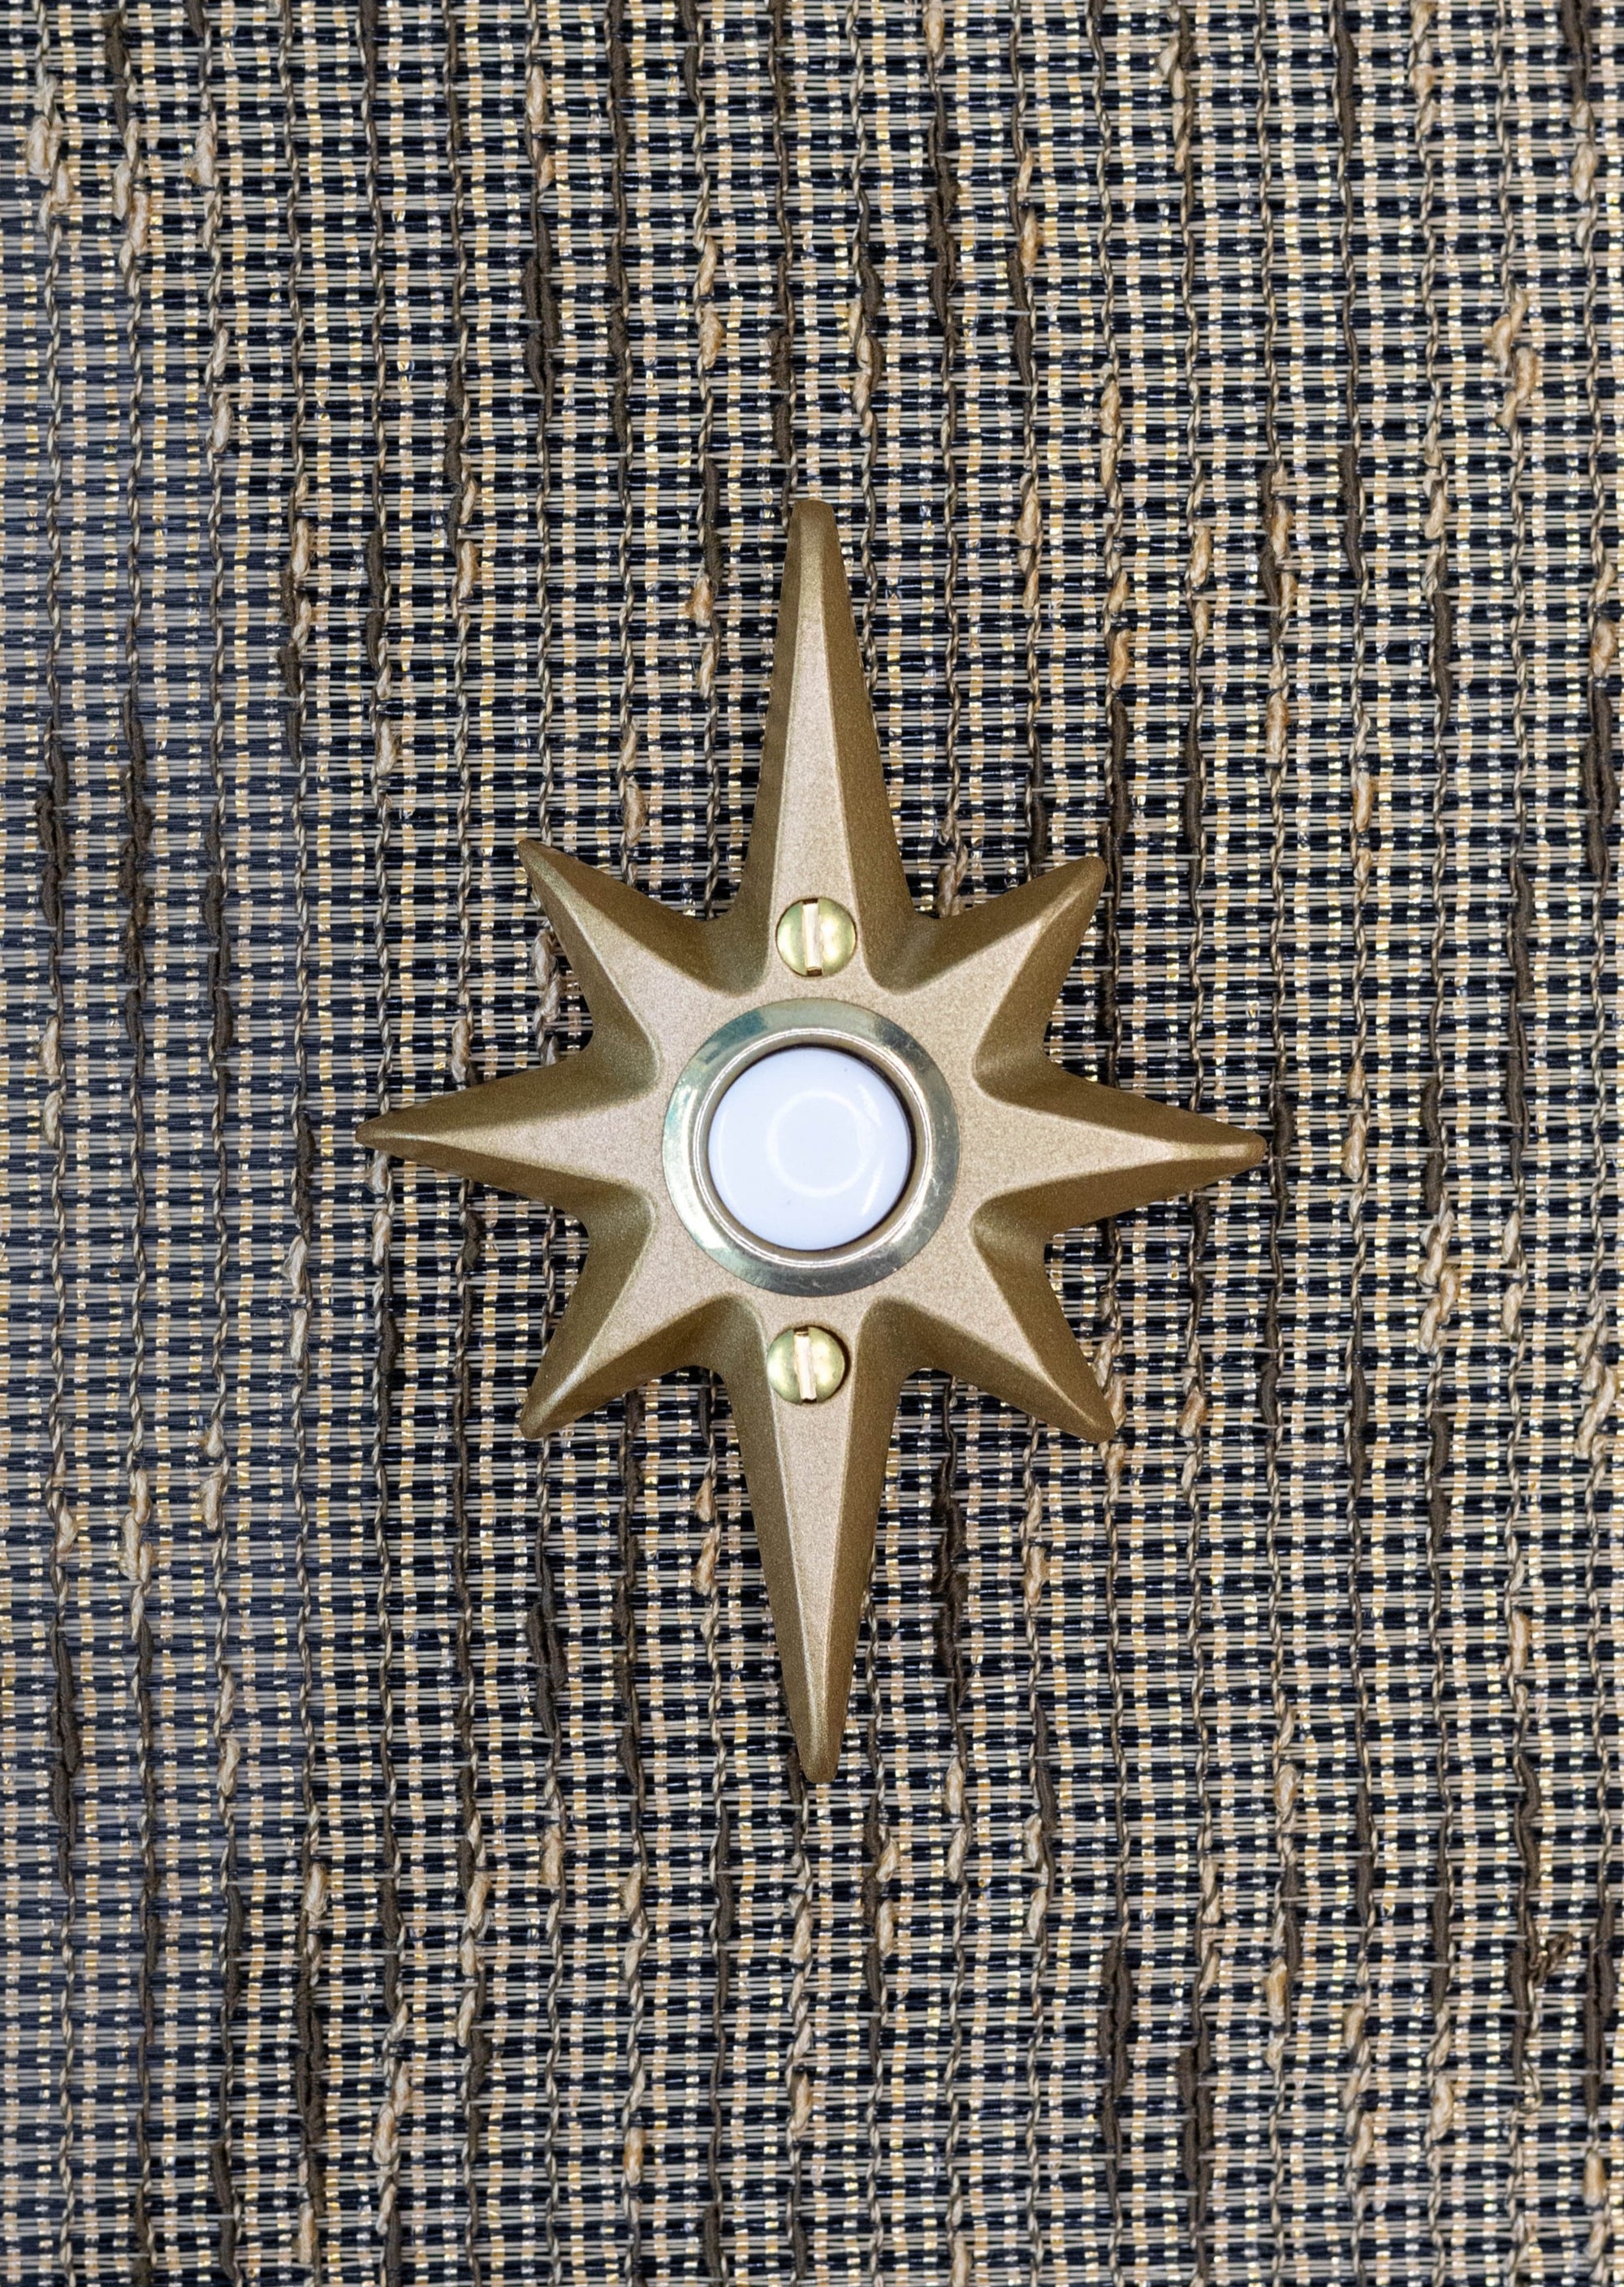 A small gold powder coated cast aluminum starburst with a gold rimmed doorbell in the middle. The doorbell itself is a white plastic. There are two gold screws, one below and one above the doorbell to attach the starburst to the wall. The gold powder coating has a smooth metallic finish that is slightly reflective of light.